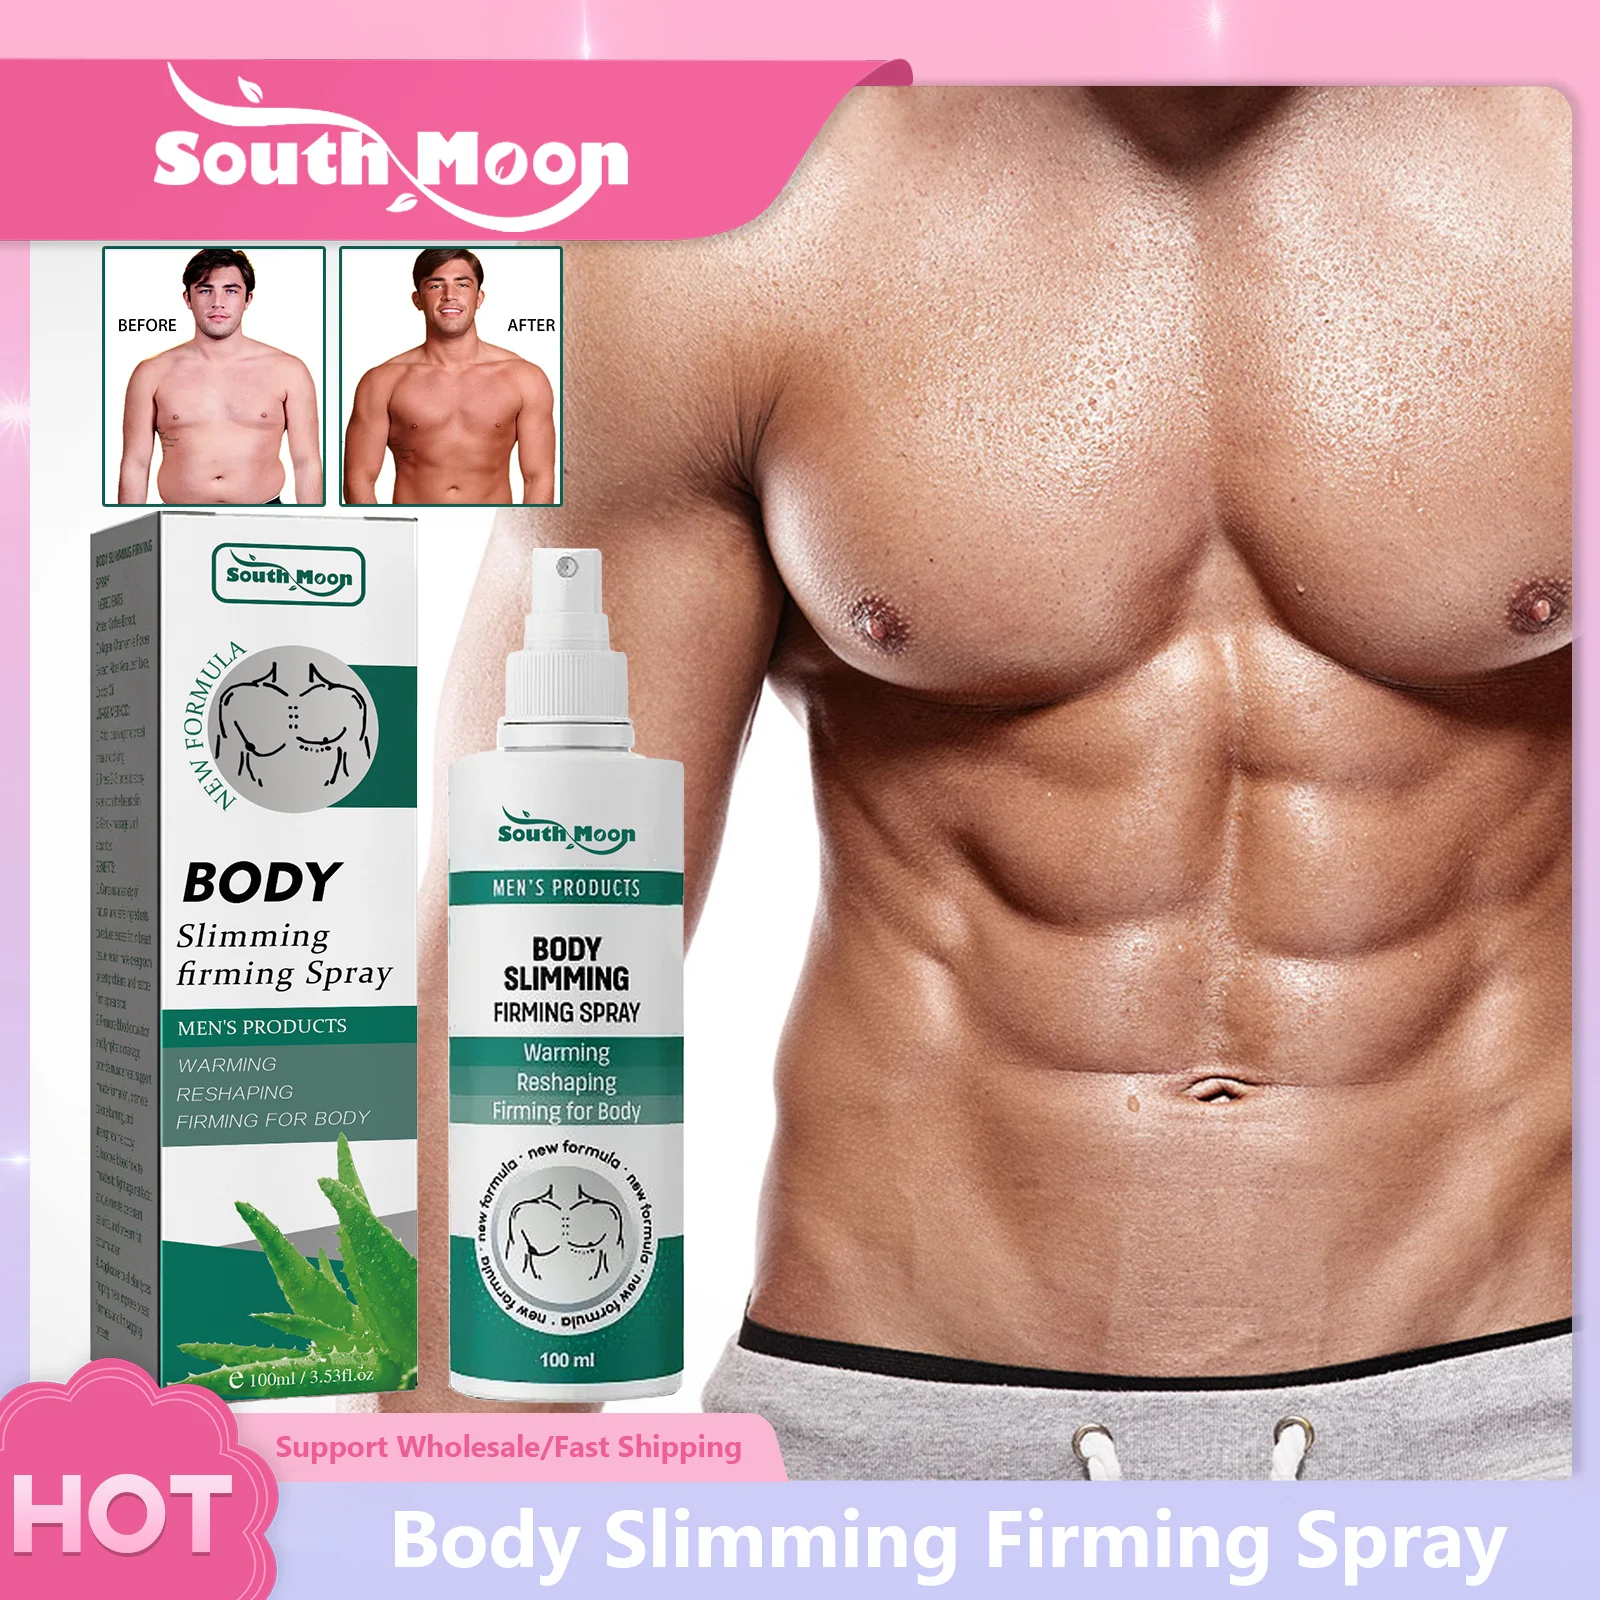 

South Moon Body Slimming Firming Spray Fat Burning Weight Loss Anti Cellulite Massage Belly Strenghten Abdomen Tighten Product